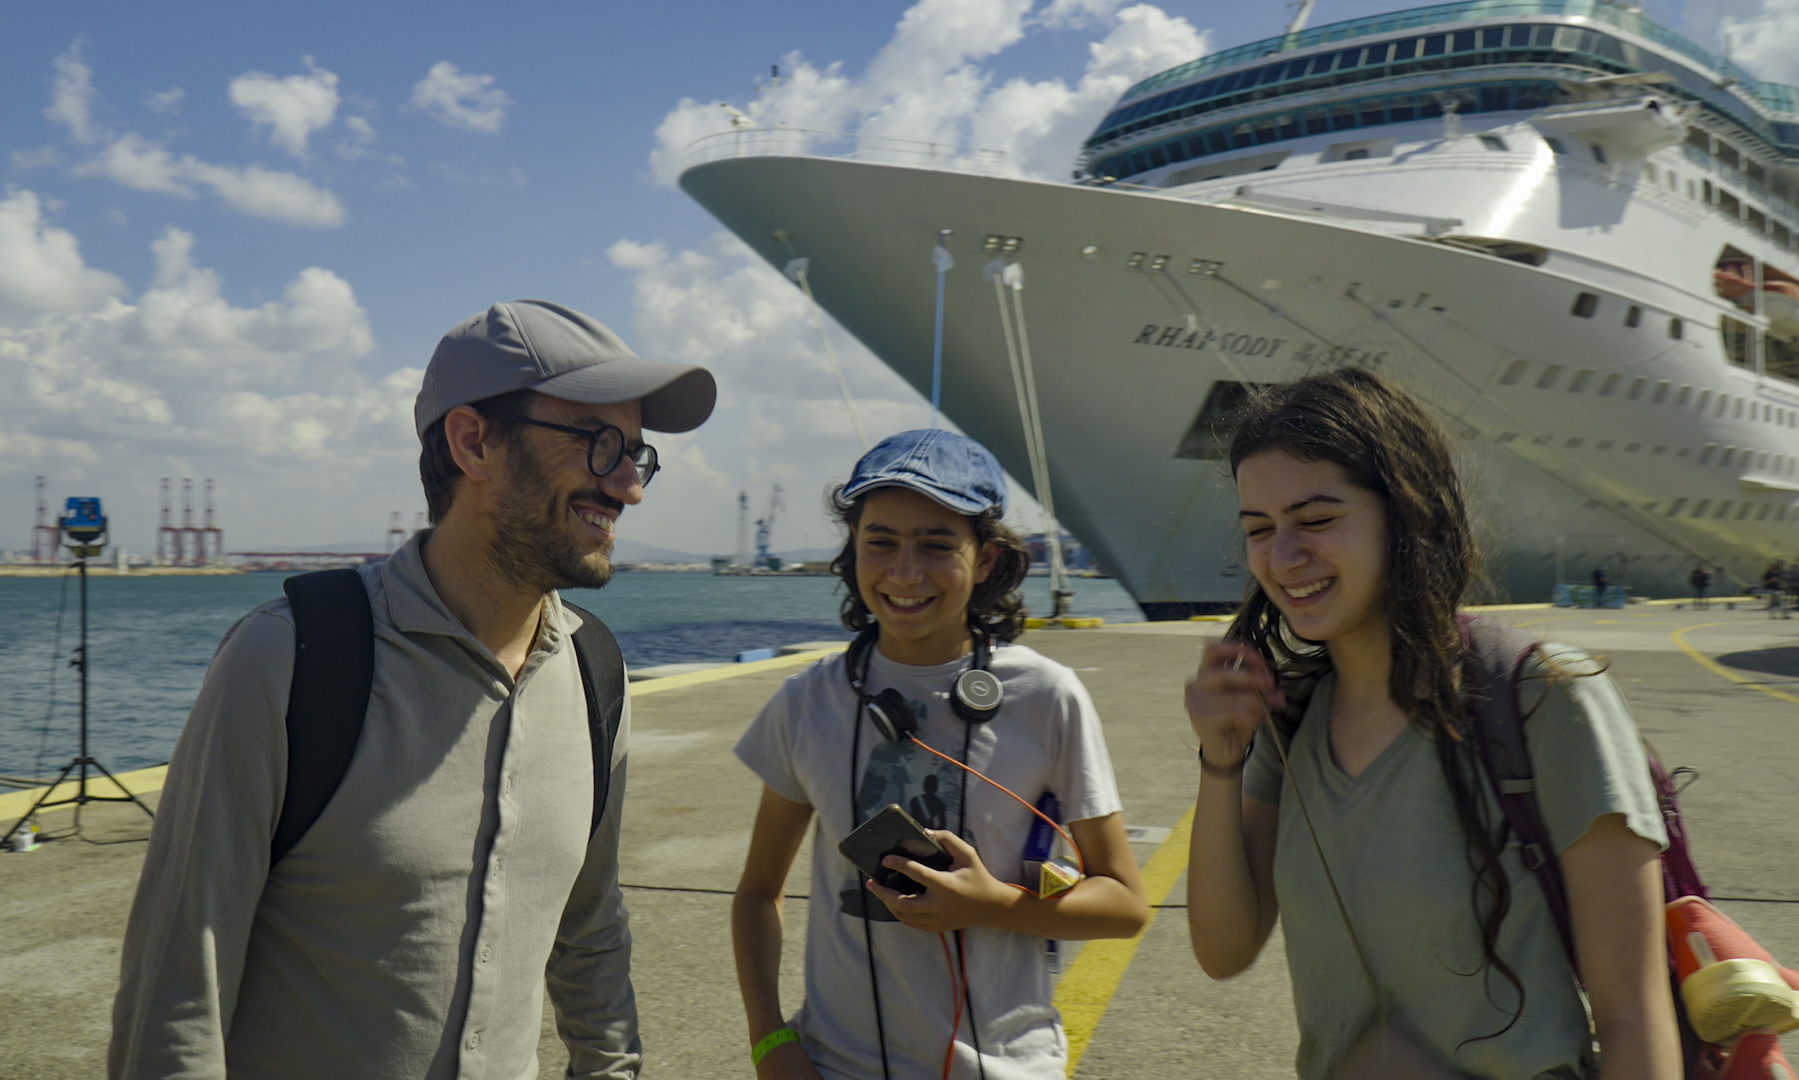 Yehuda Halberg and his family have as they board the “Rhapsody of the Seas."